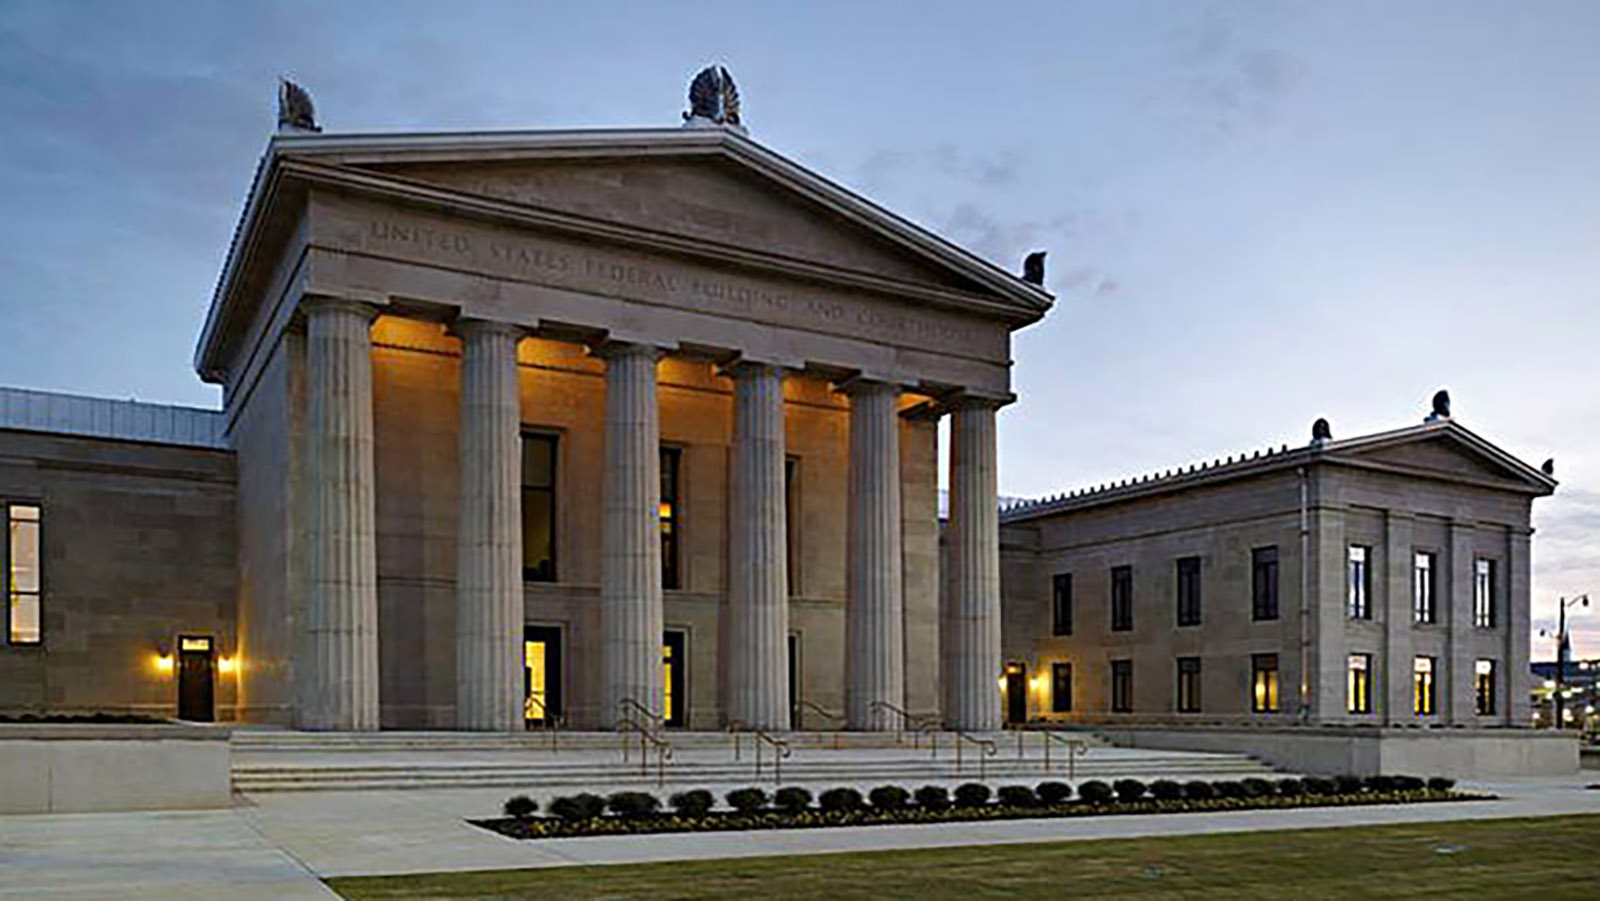 A classical courthouse in Tuscaloosa